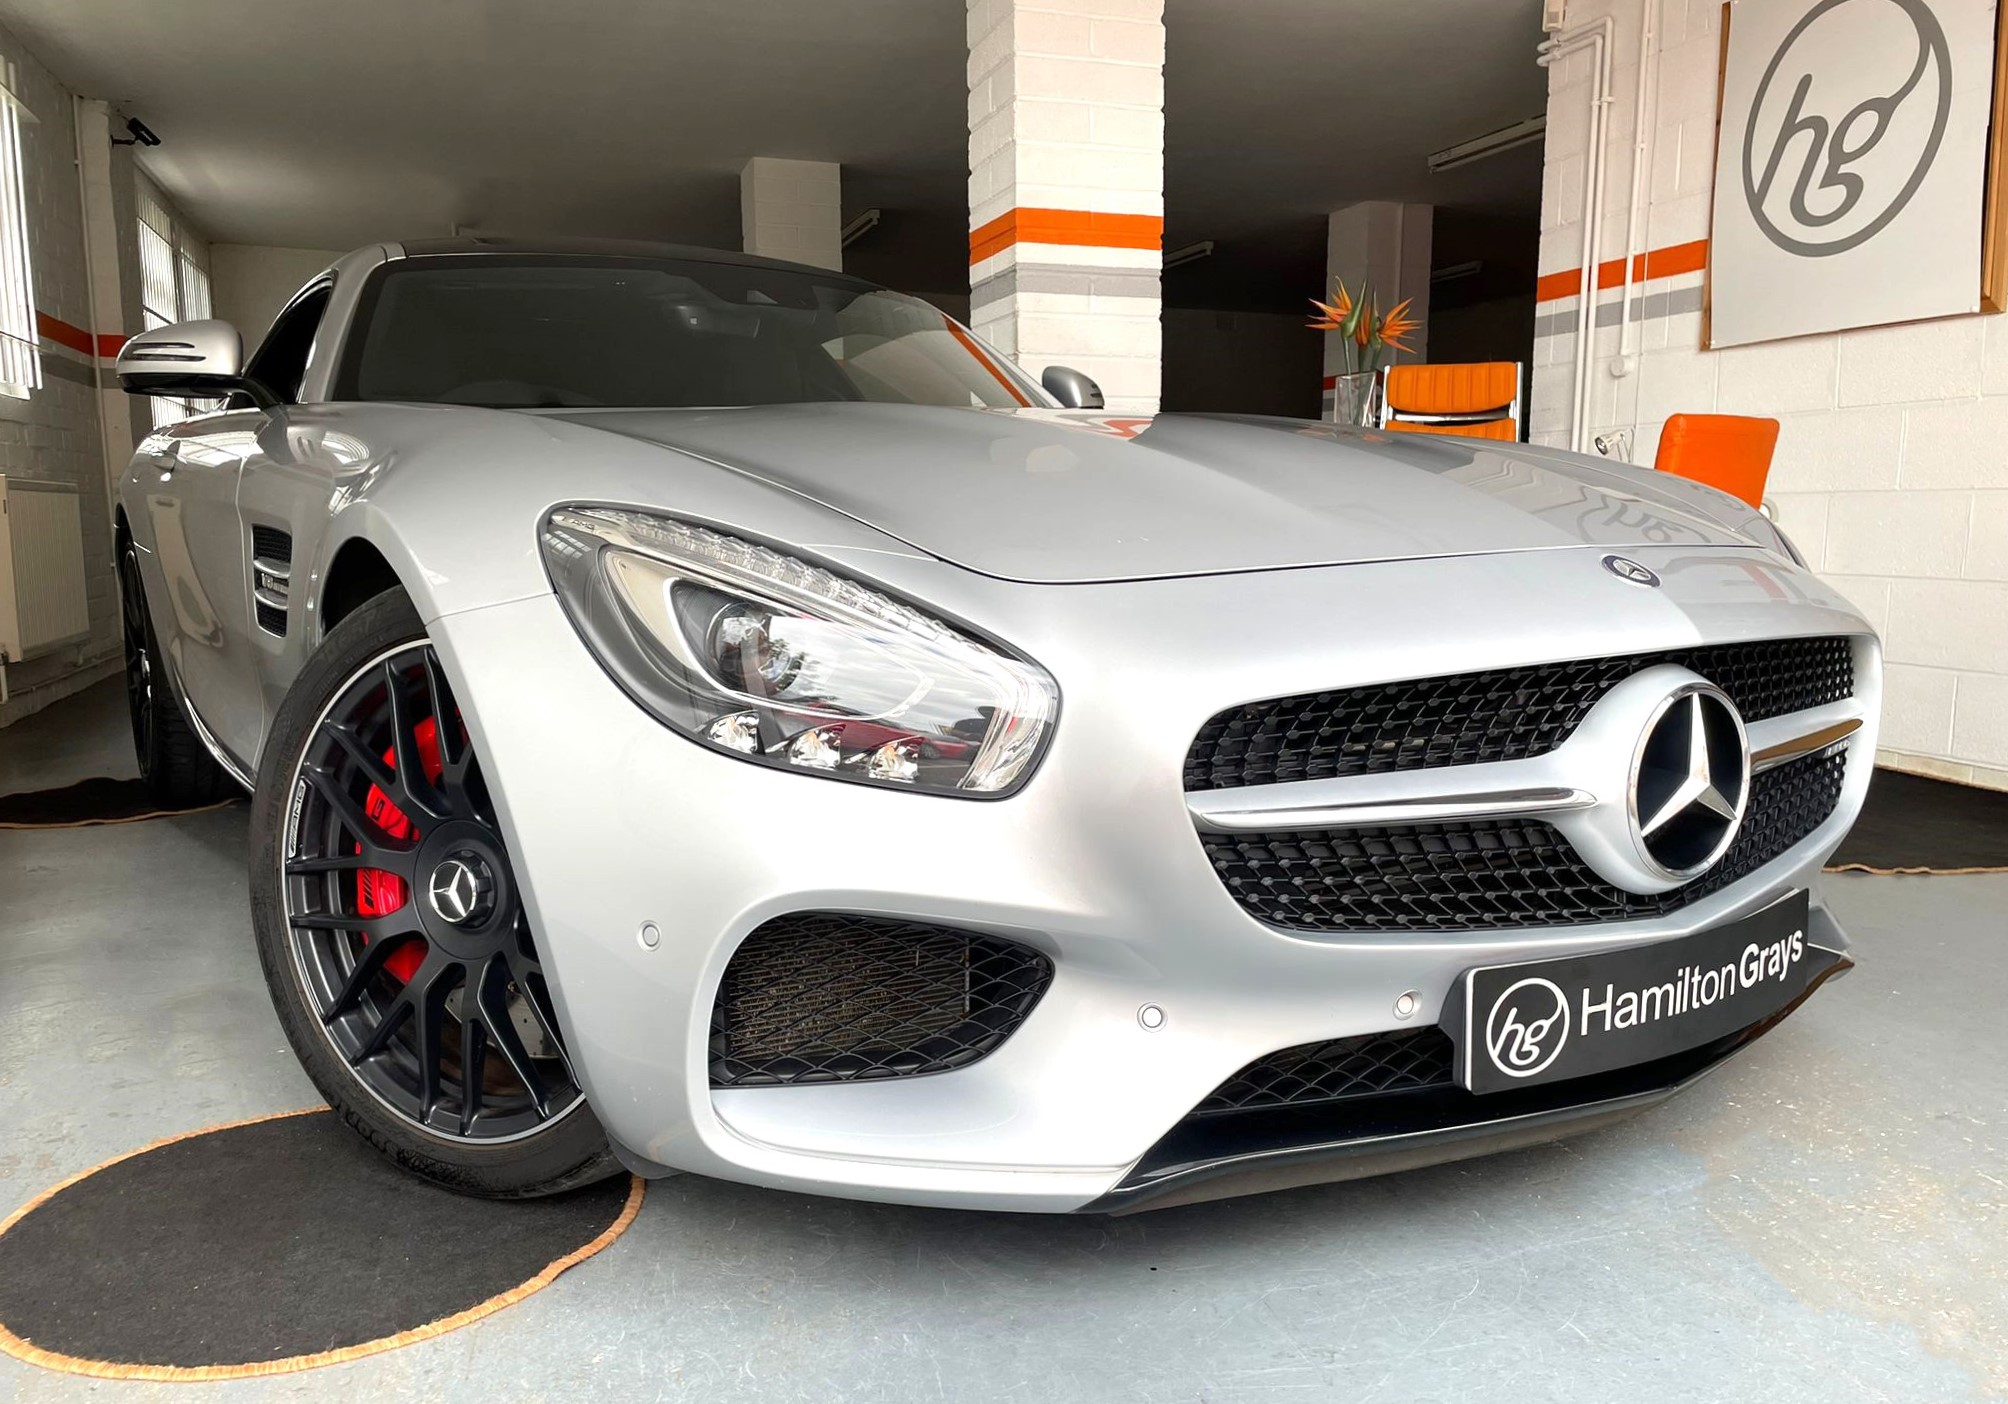 2016 (16) Mercedes-Benz AMG GT 4.0 V8 BiTurbo S (Premium) SpdS DCT. In Iridium Silver with Full Black Nappa Leather Interior. FBMWSH. Just 29k.. Striking! Just Serviced MB 5.9.22. / MOT (SOLD)